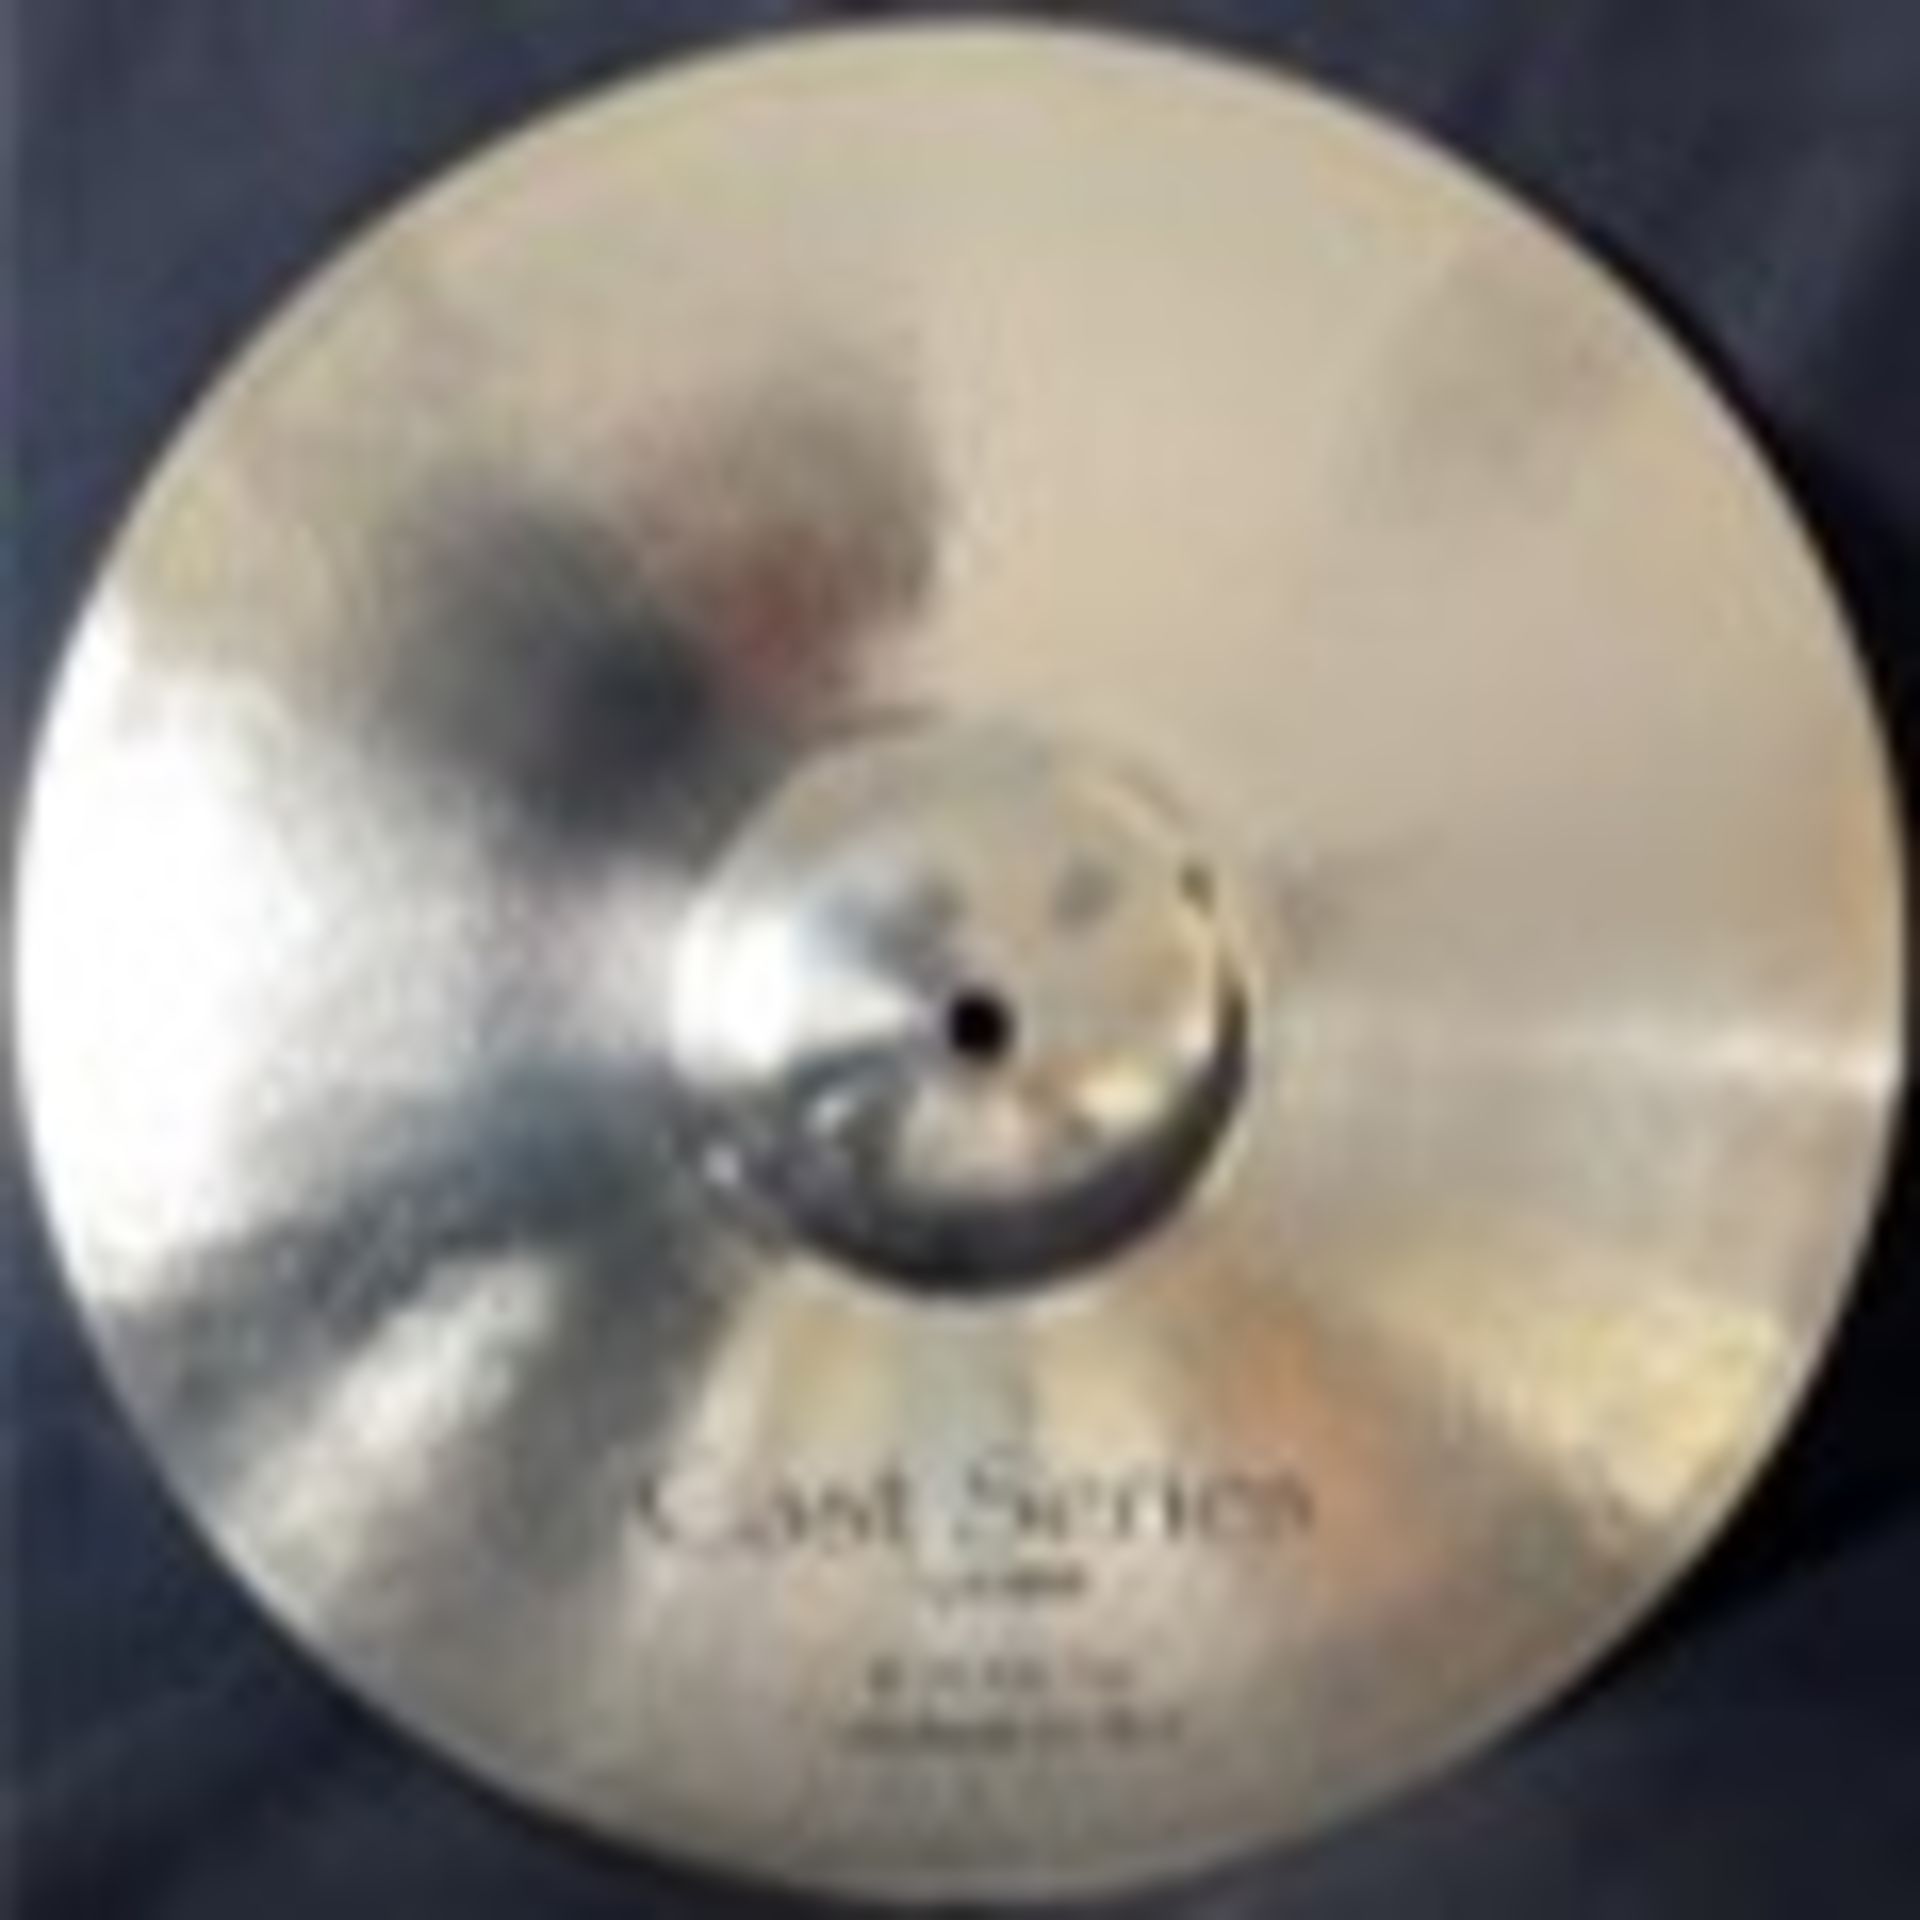 Sonor Cast Series Pair 14" Hi Hat cymbals, lovely rich, dry sound